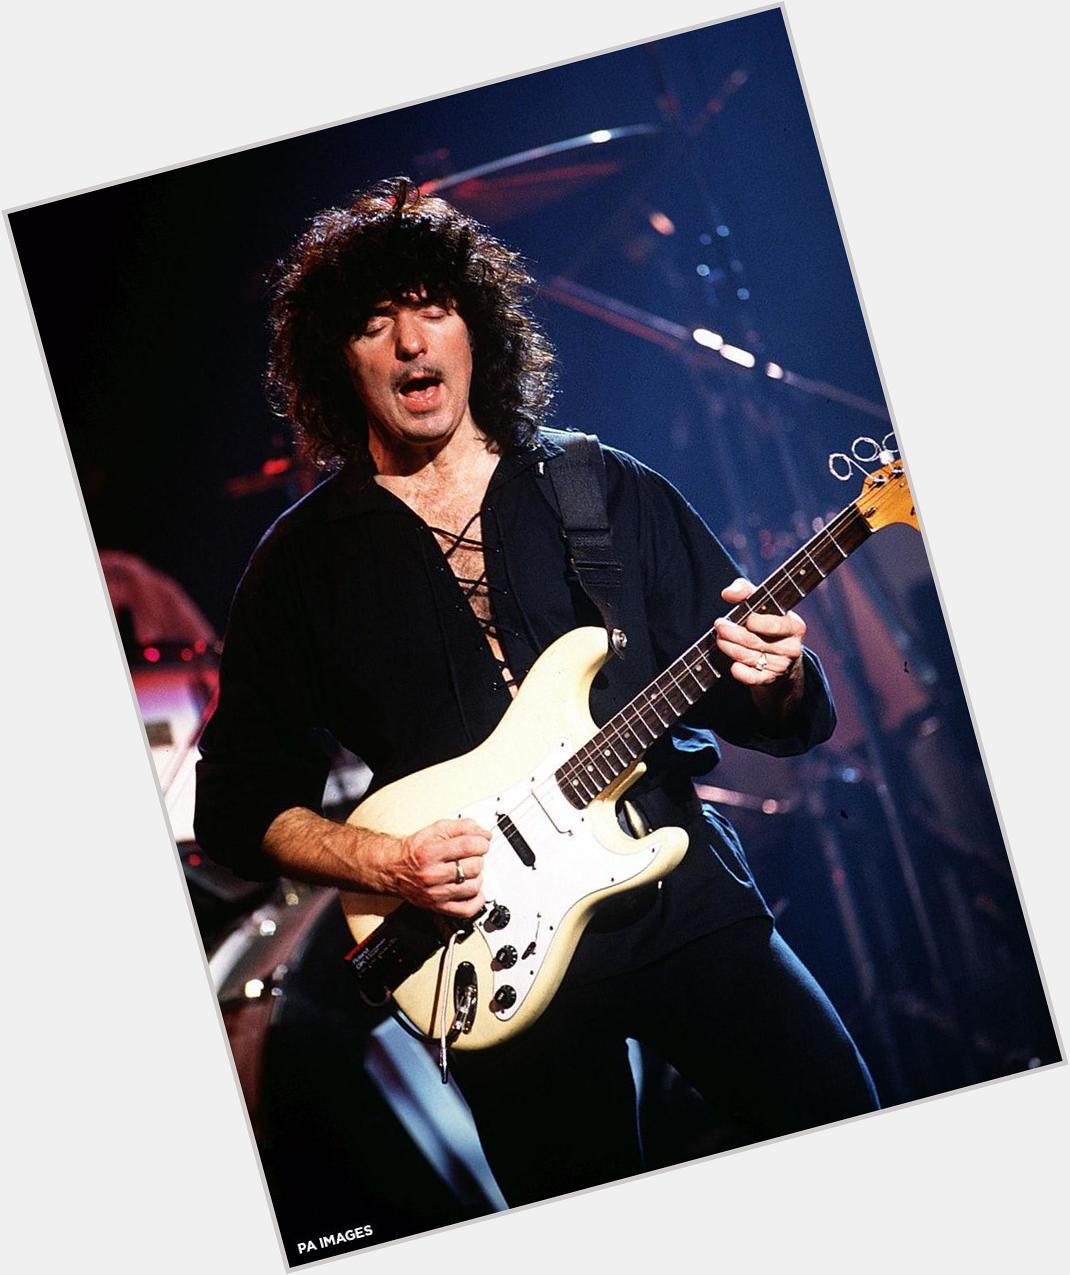 Wishing a very happy birthday to Ritchie Blackmore today! Legend. 